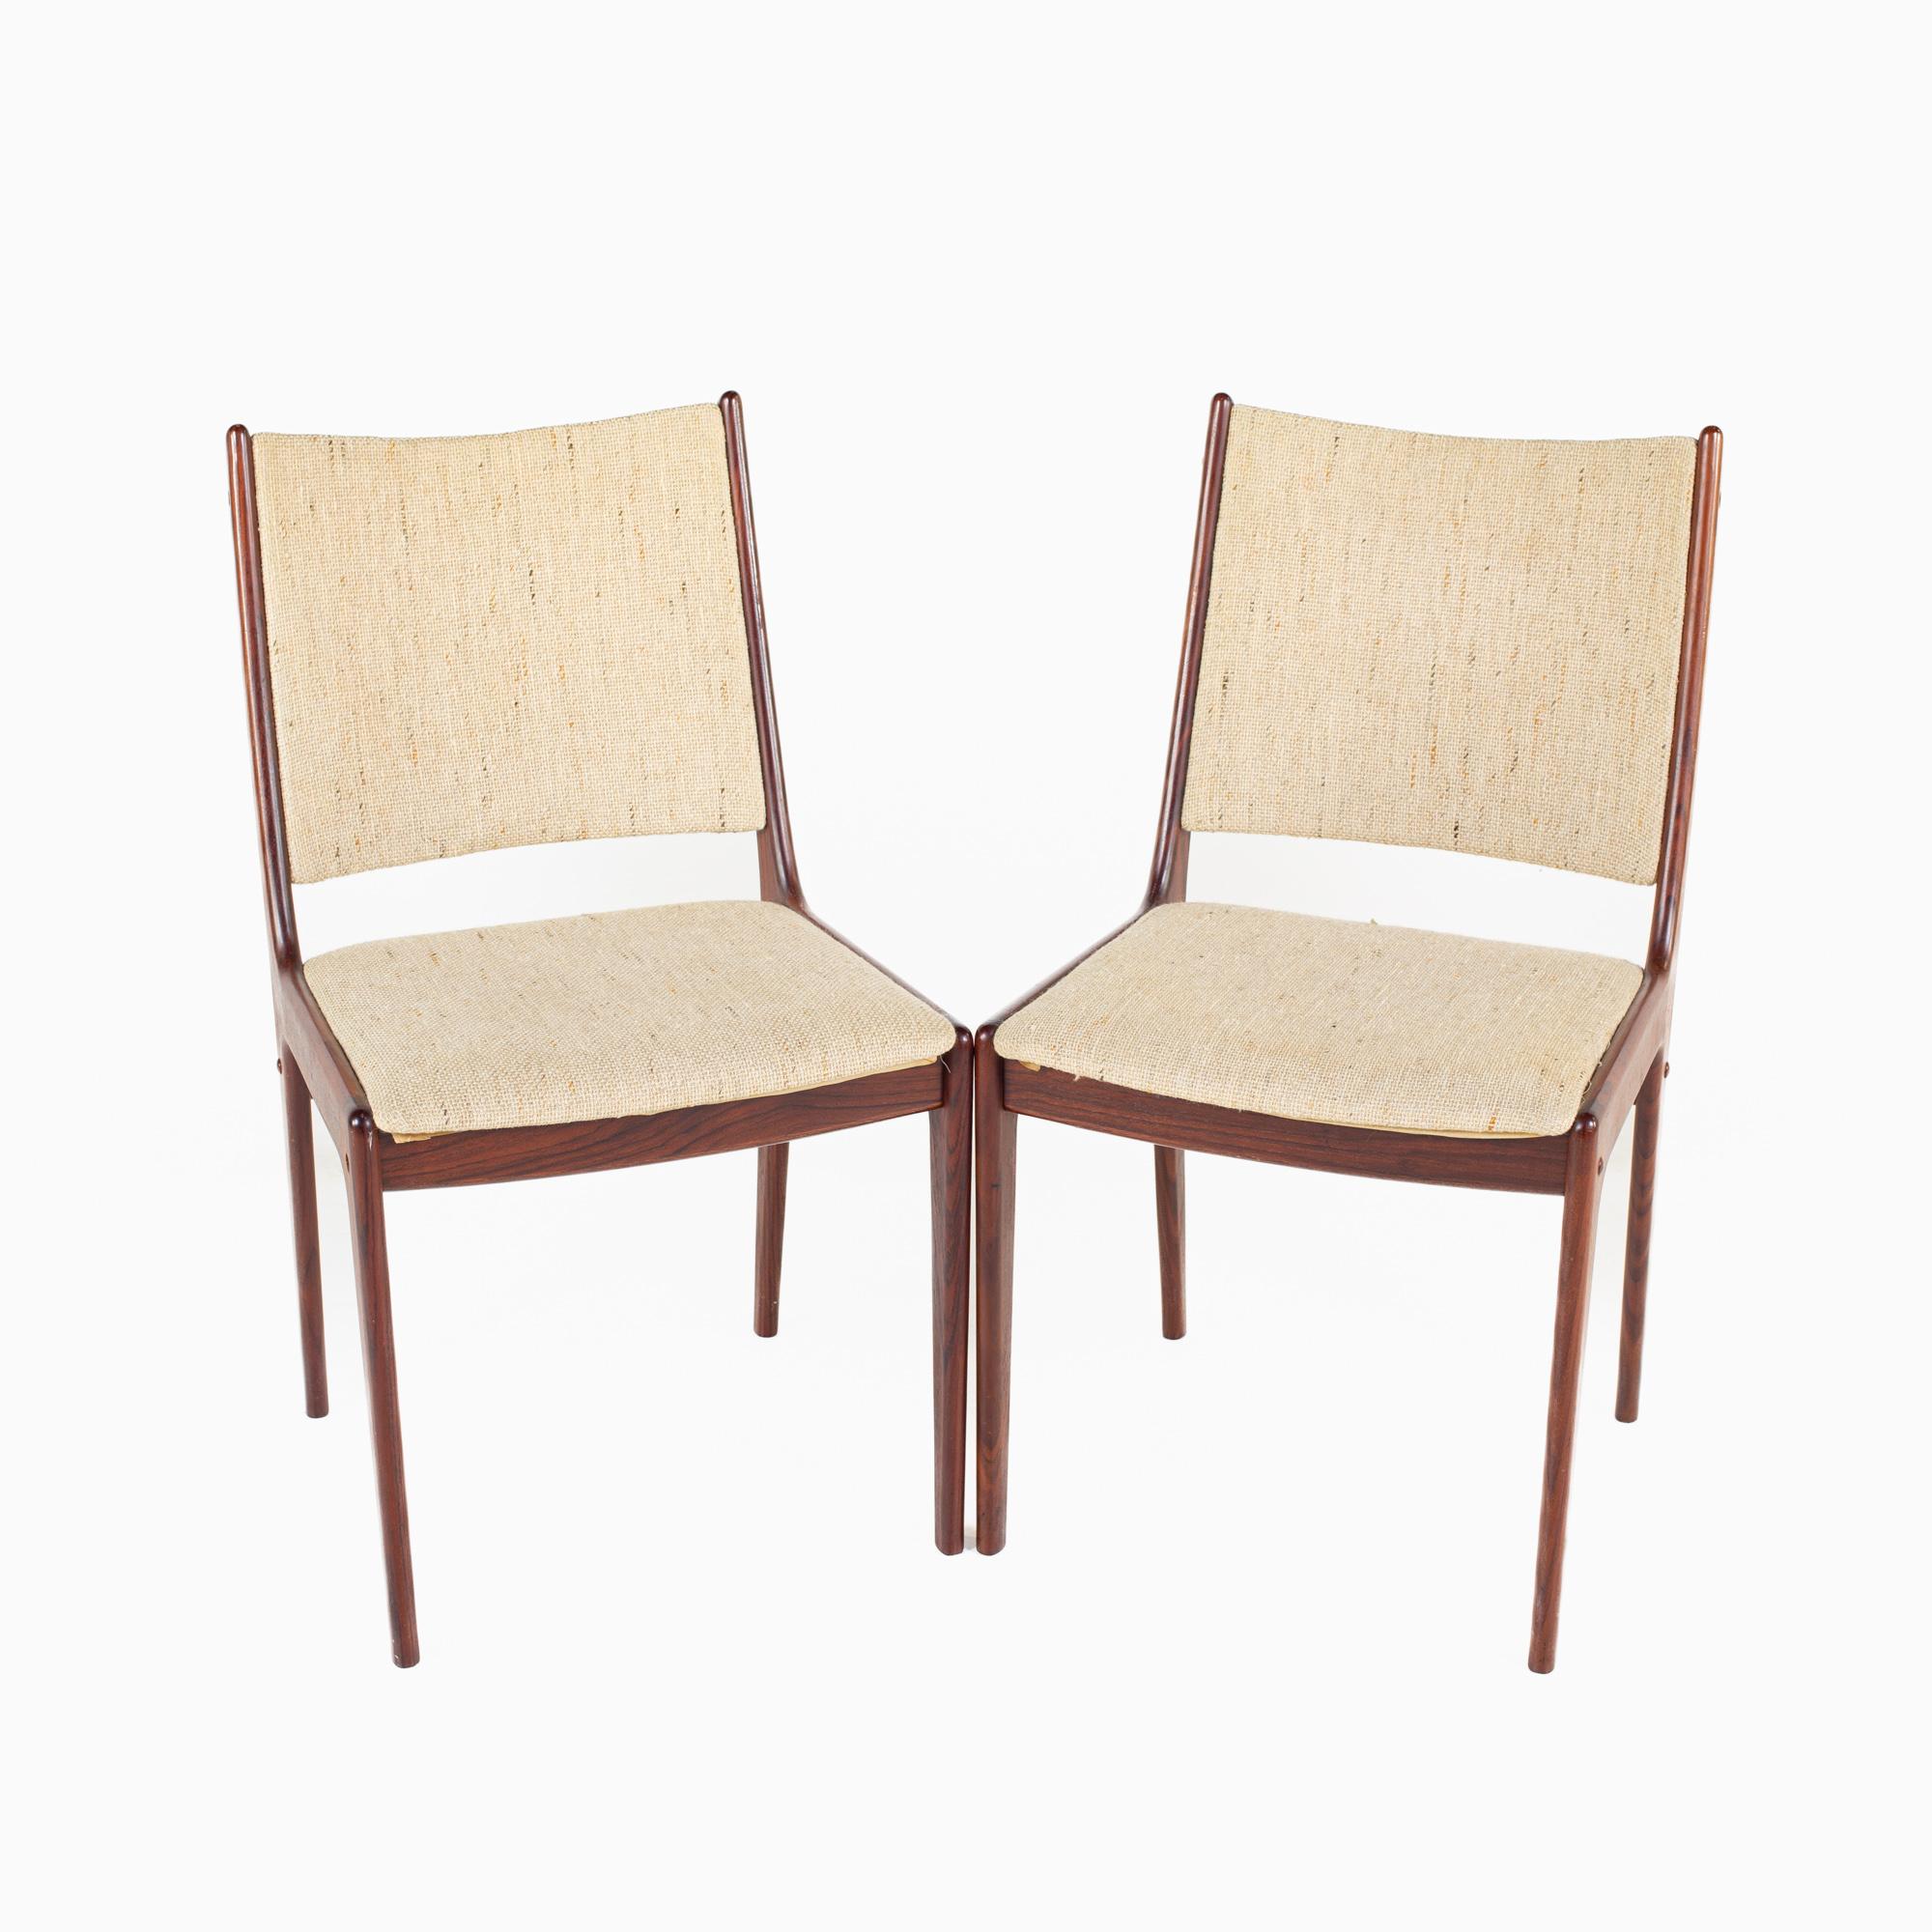 D scan mid-century Danish rosewood dining chairs- set of 2

Each chair measures: 18.5 wide x 19.5 deep x 32.5 inches high, with a seat height of 17.5 inches

All pieces of furniture can be had in what we call restored vintage condition. That